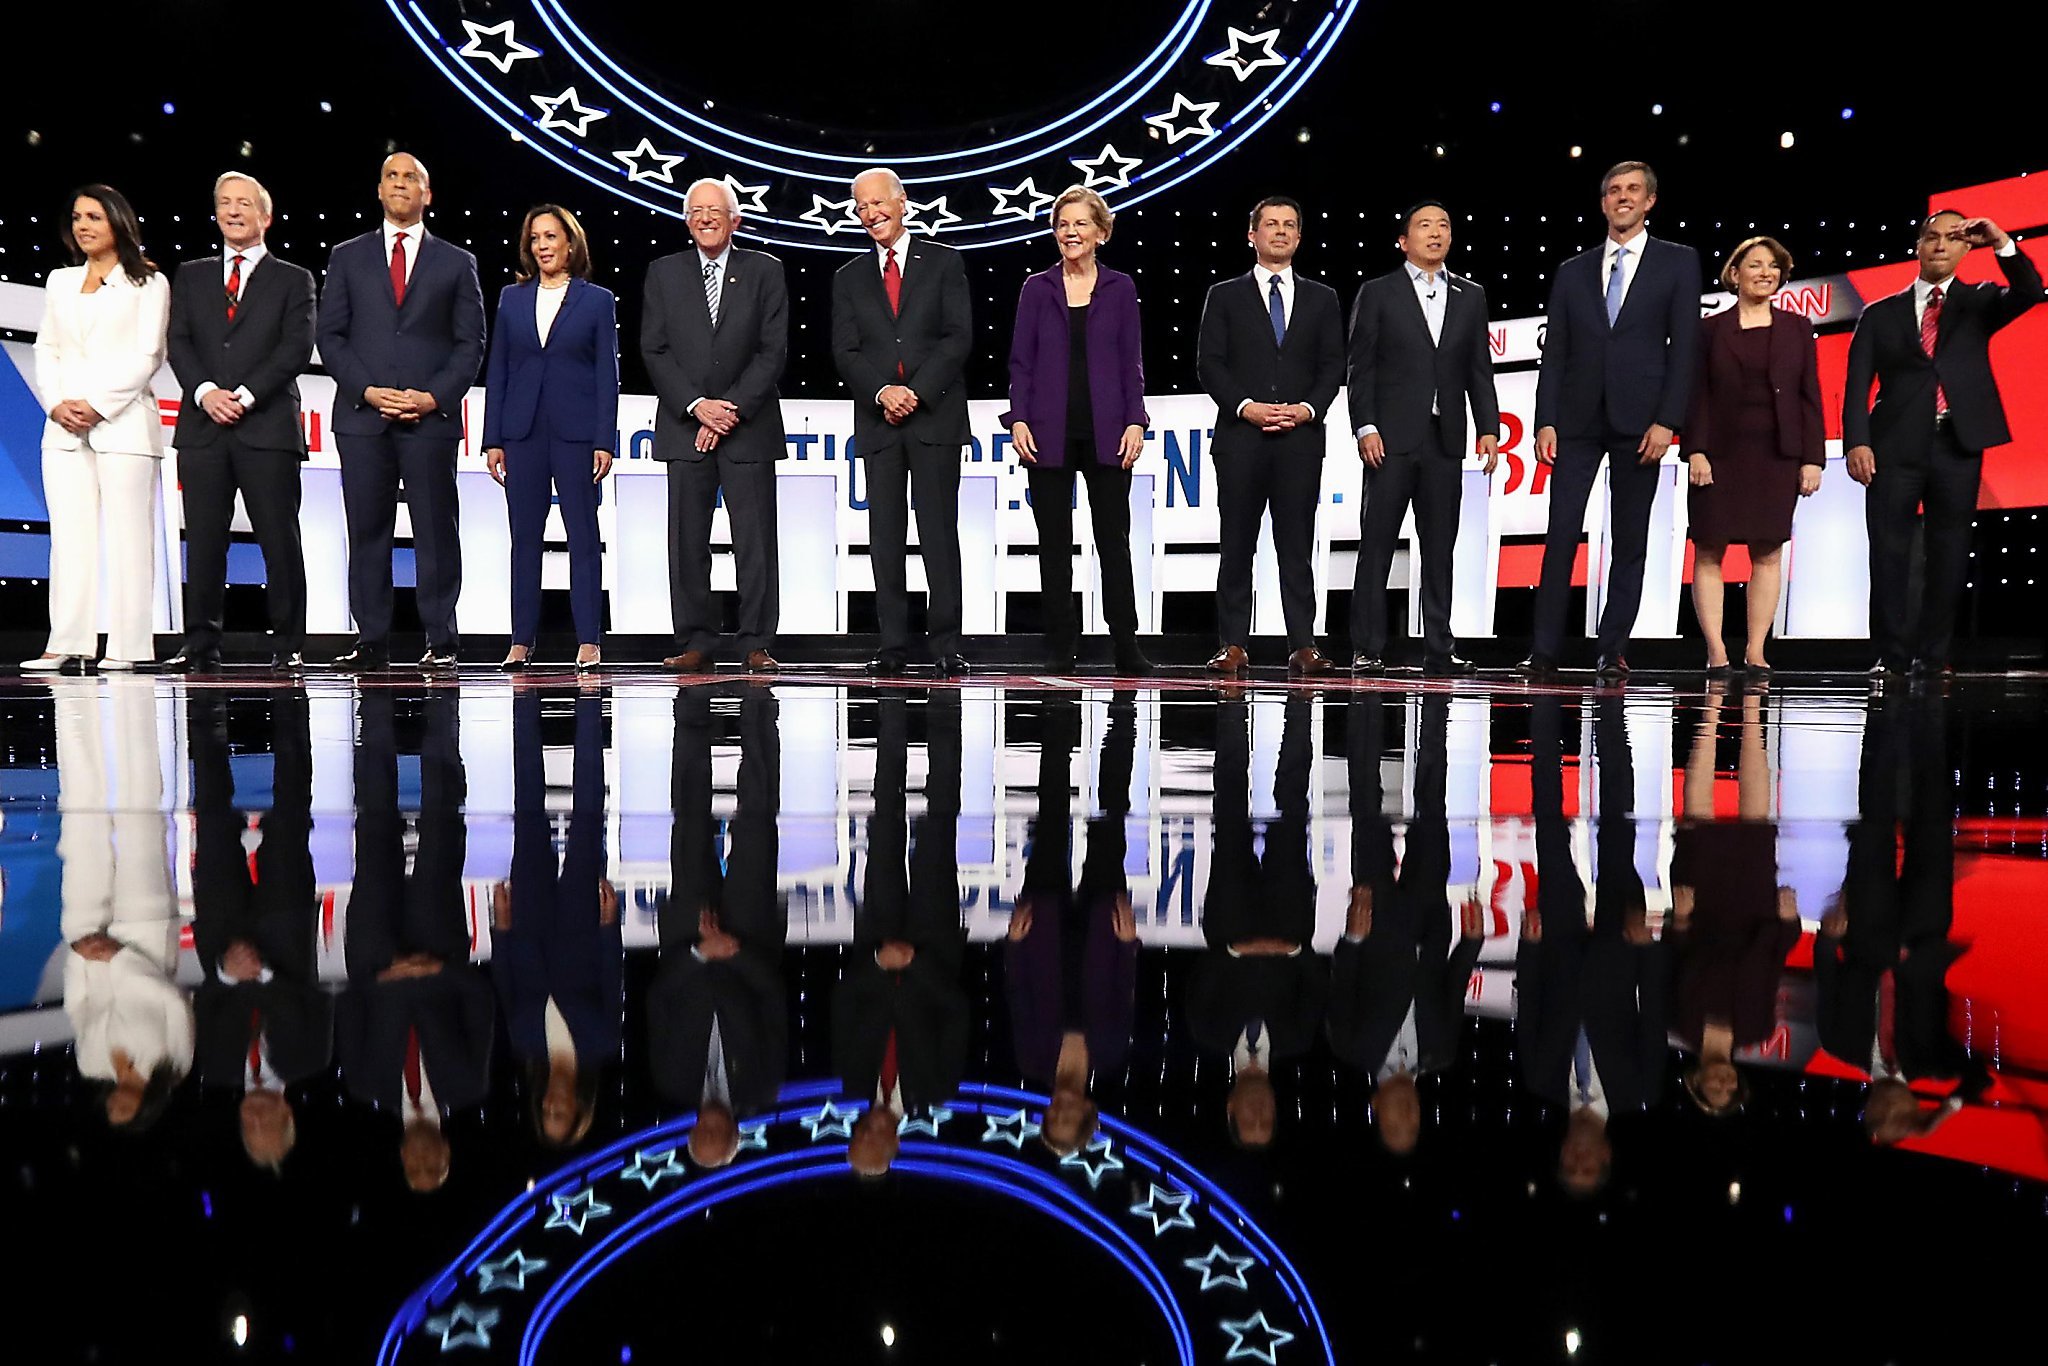 Democrats’ ‘most diverse field’ ended up with two white men. Can that be changed next time?